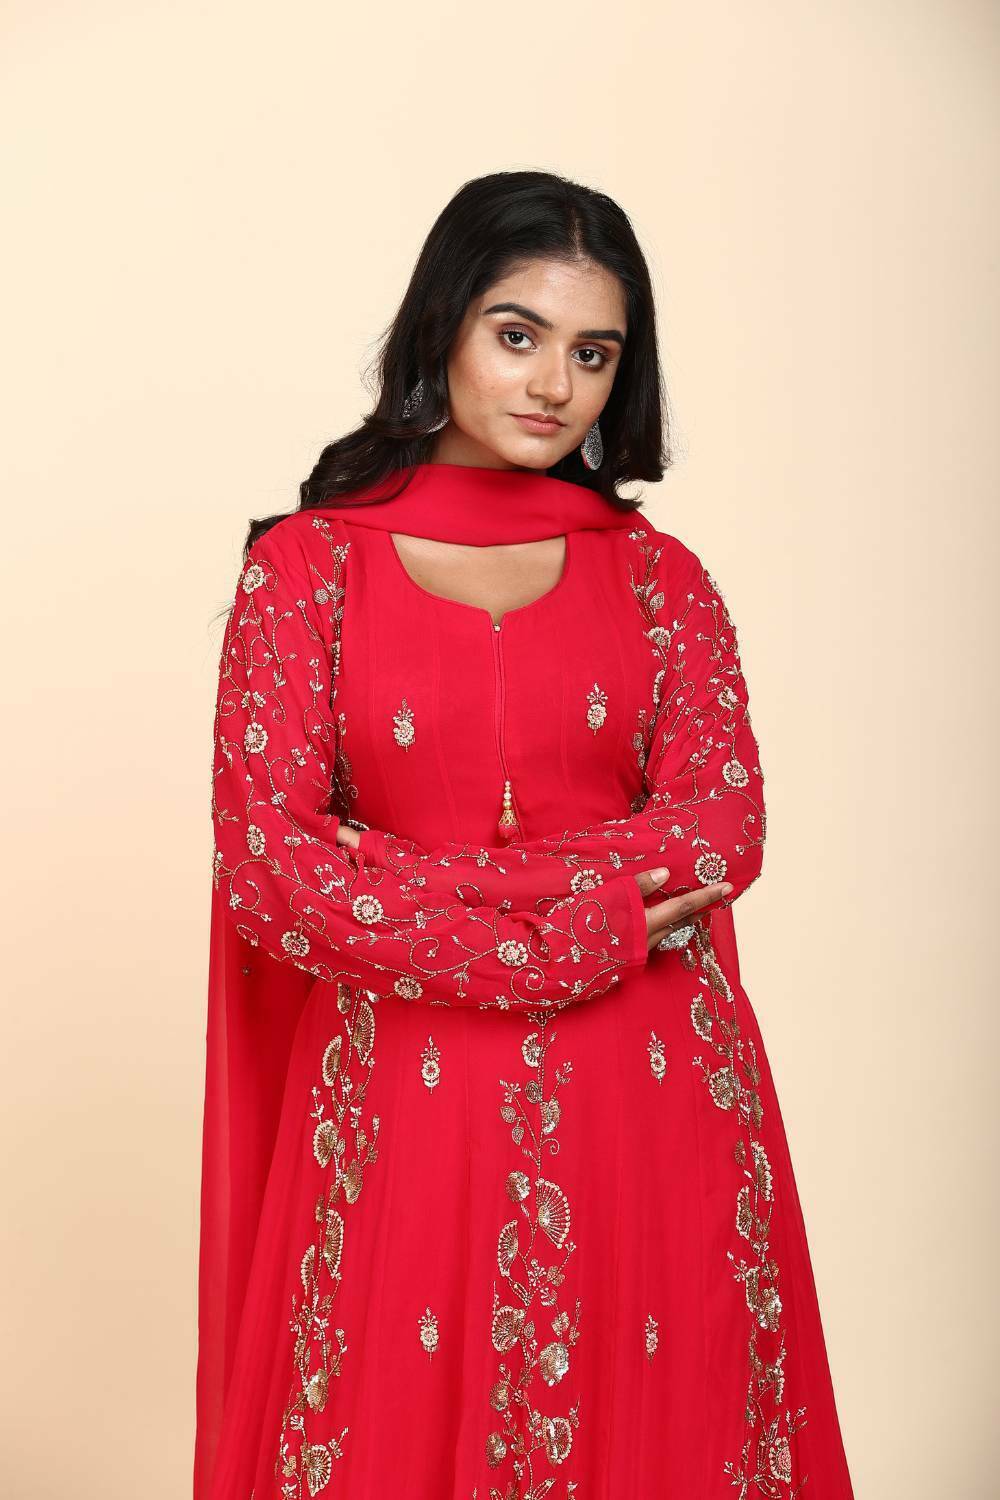 Red Georgette Anarkali with panel design and moti work in a traditional Indian outfit